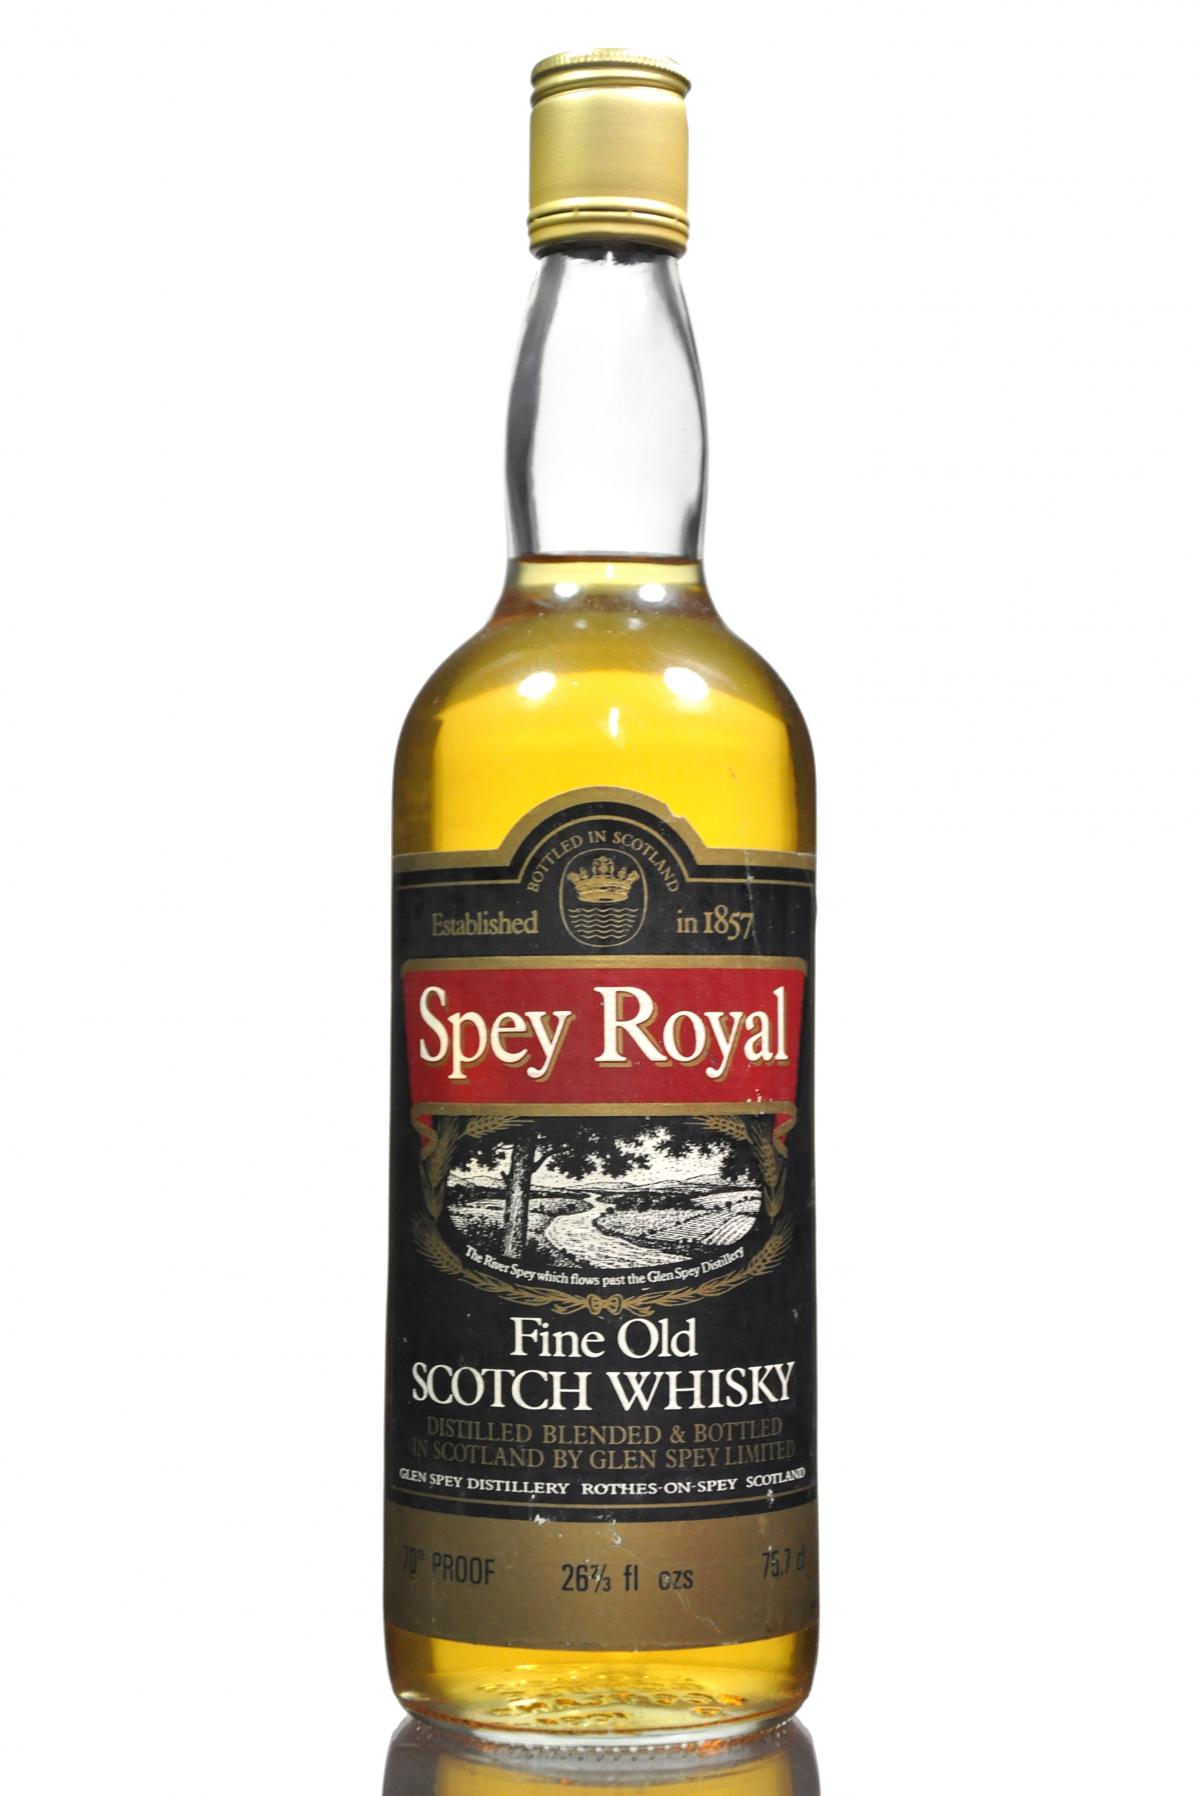 Spey Royal - Late 1970s